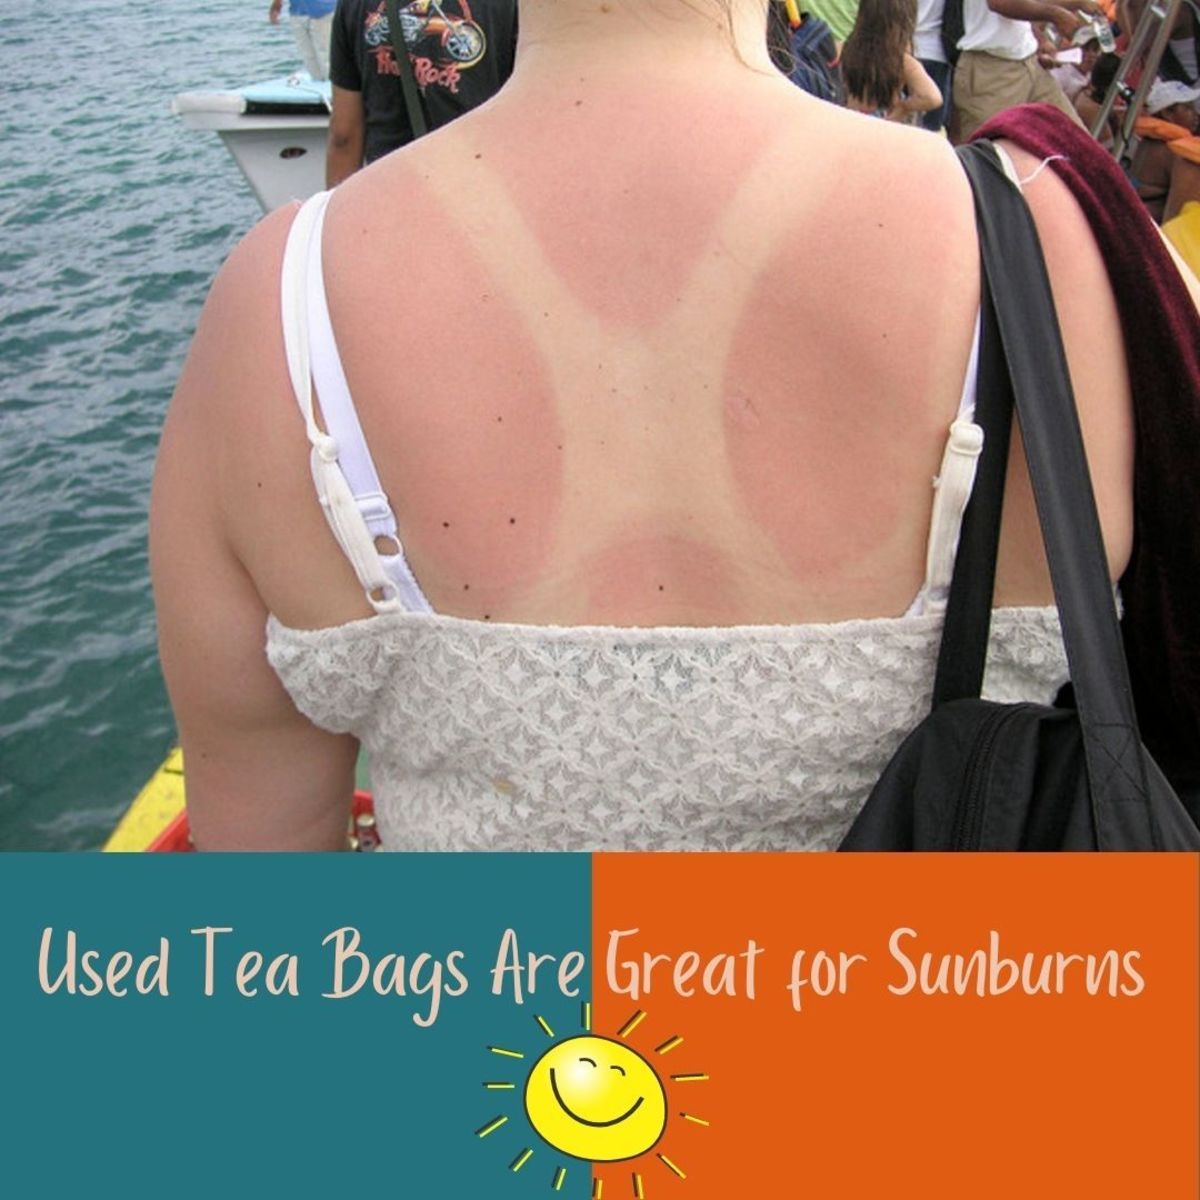 Help relieve pain from sunburns and other ailments with tea bags.